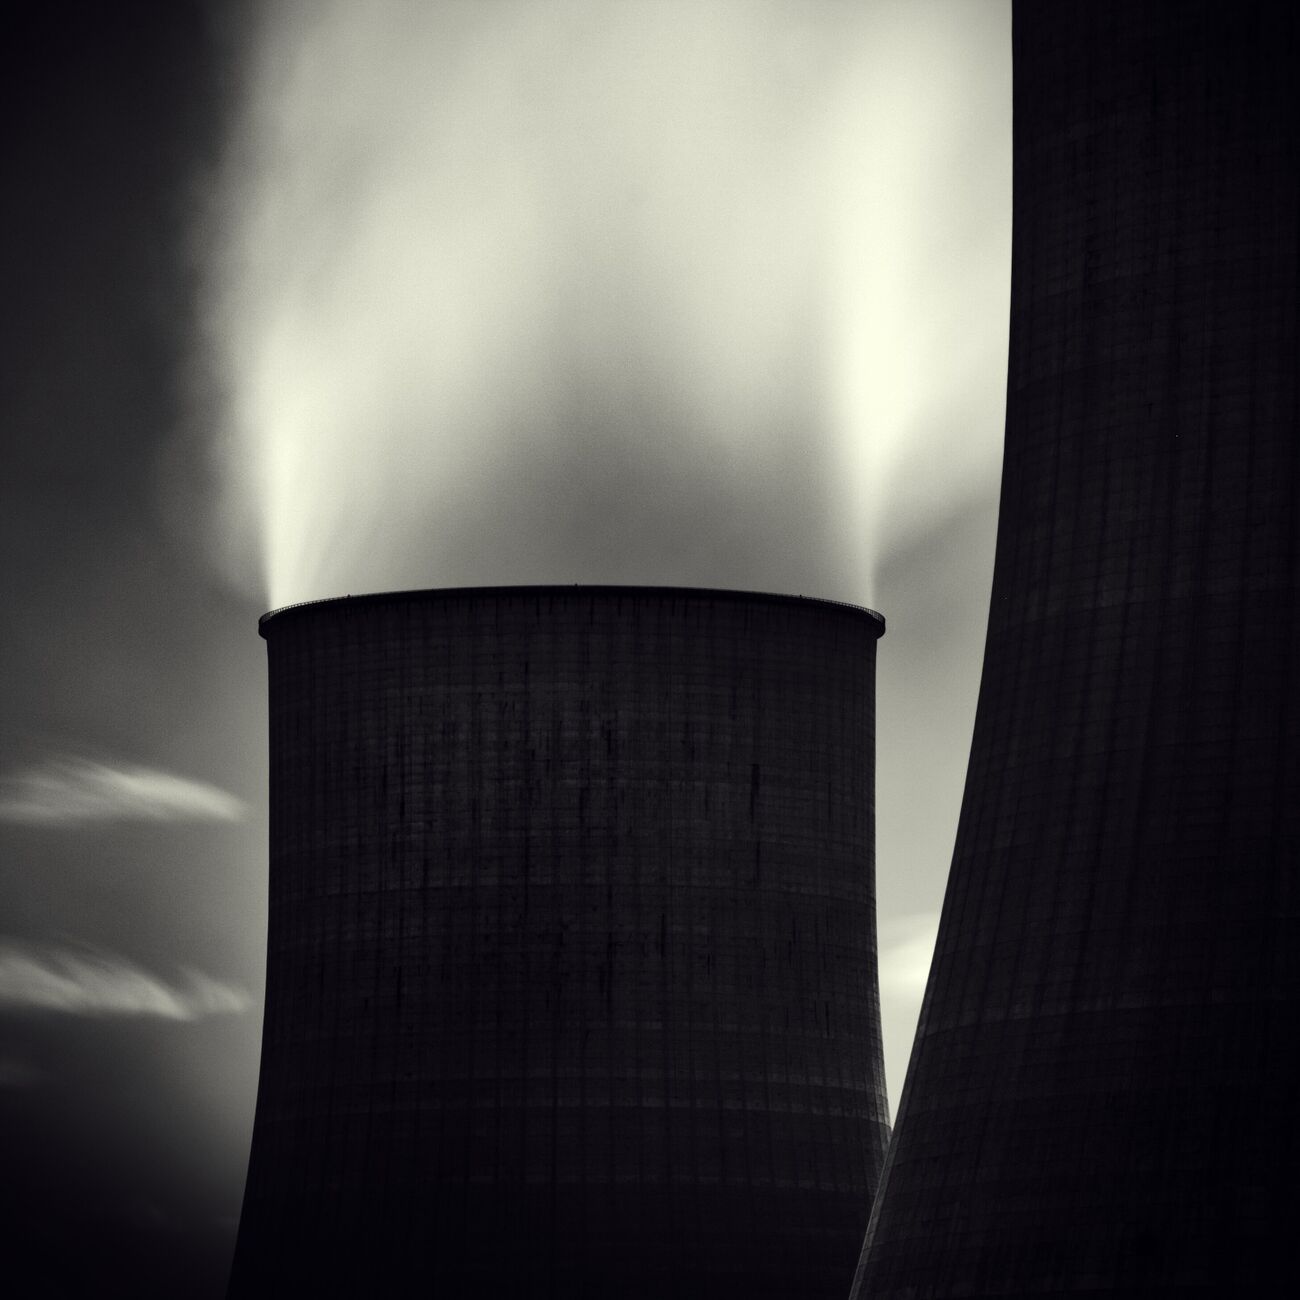 Nuclear Power Plant, Study 2, Golfech, France. August 2006. Ref-1028 - Denis Olivier Photography